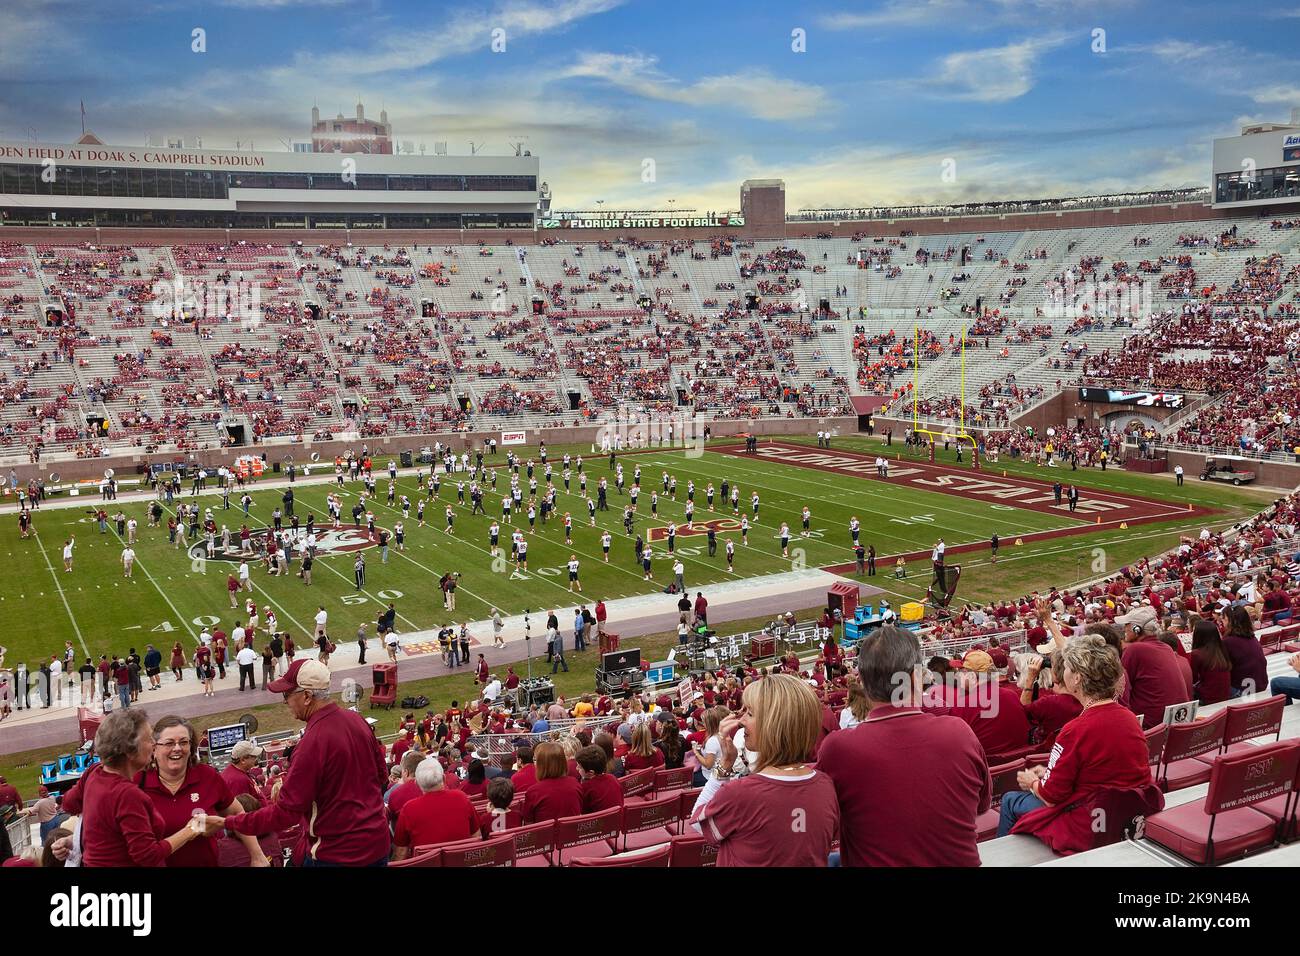 Tallahassee, Florida - November 16, 2013: Fans gathering at Doak Campbell Stadium to watch a Florida State University football game with the FSU Semin Stock Photo